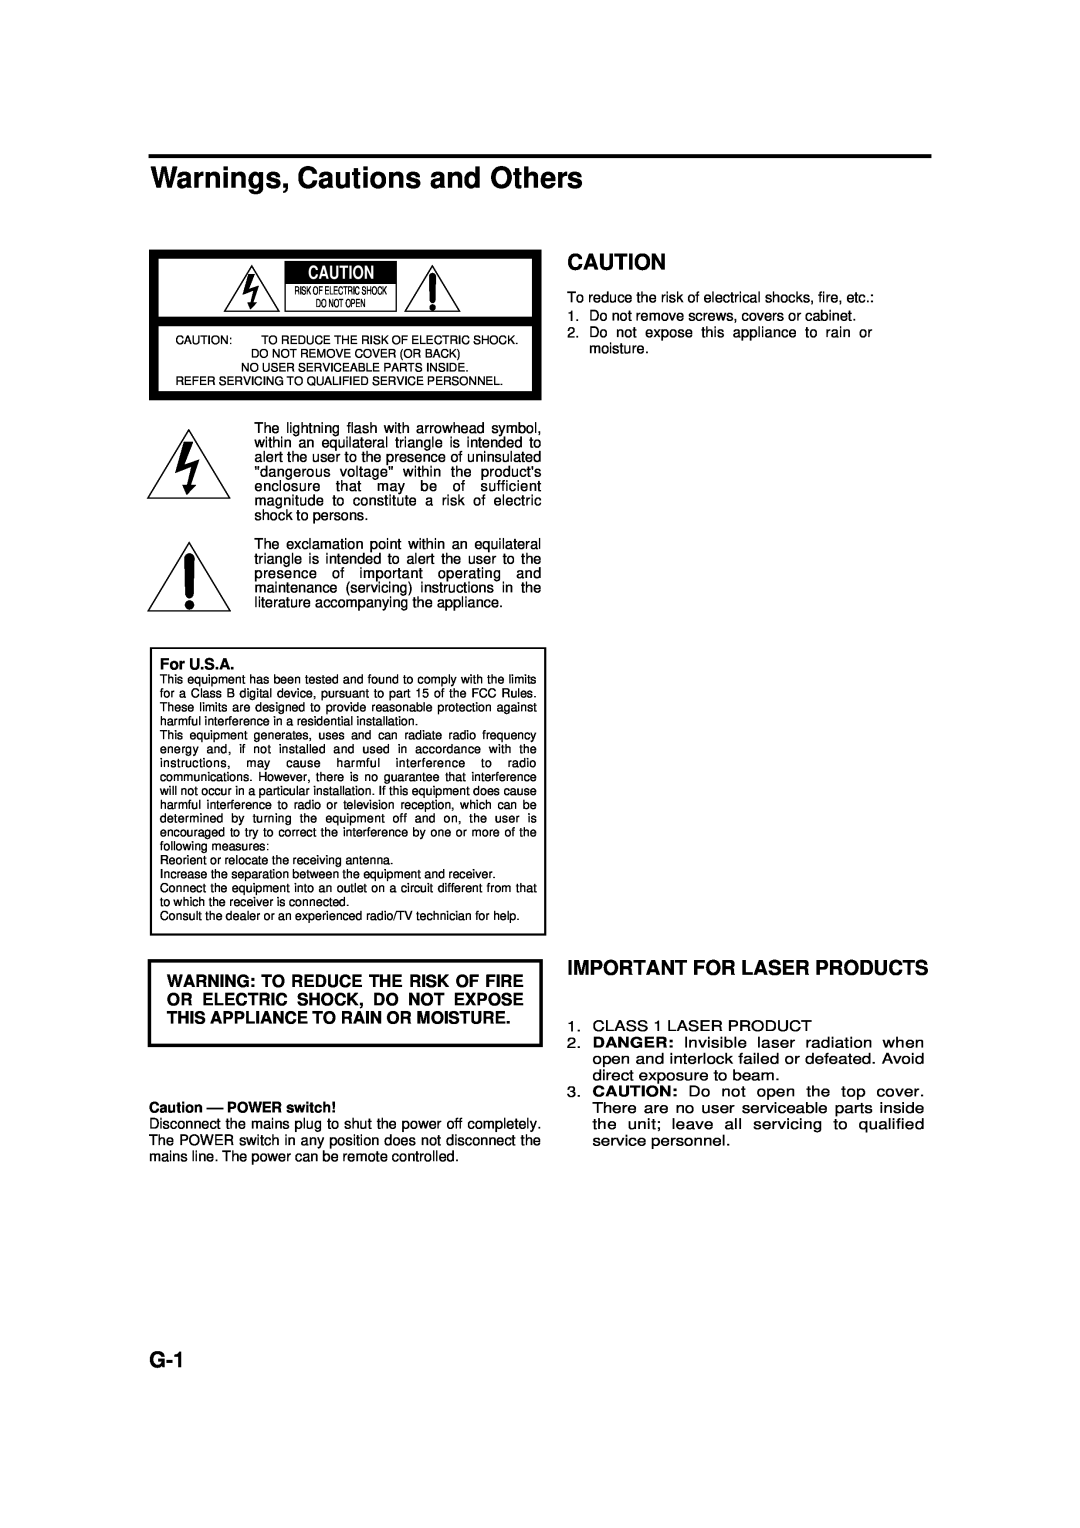 JVC XM-EX90 manual Warnings, Cautions and Others, Important For Laser Products, For U.S.A, Caution --POWER switch 